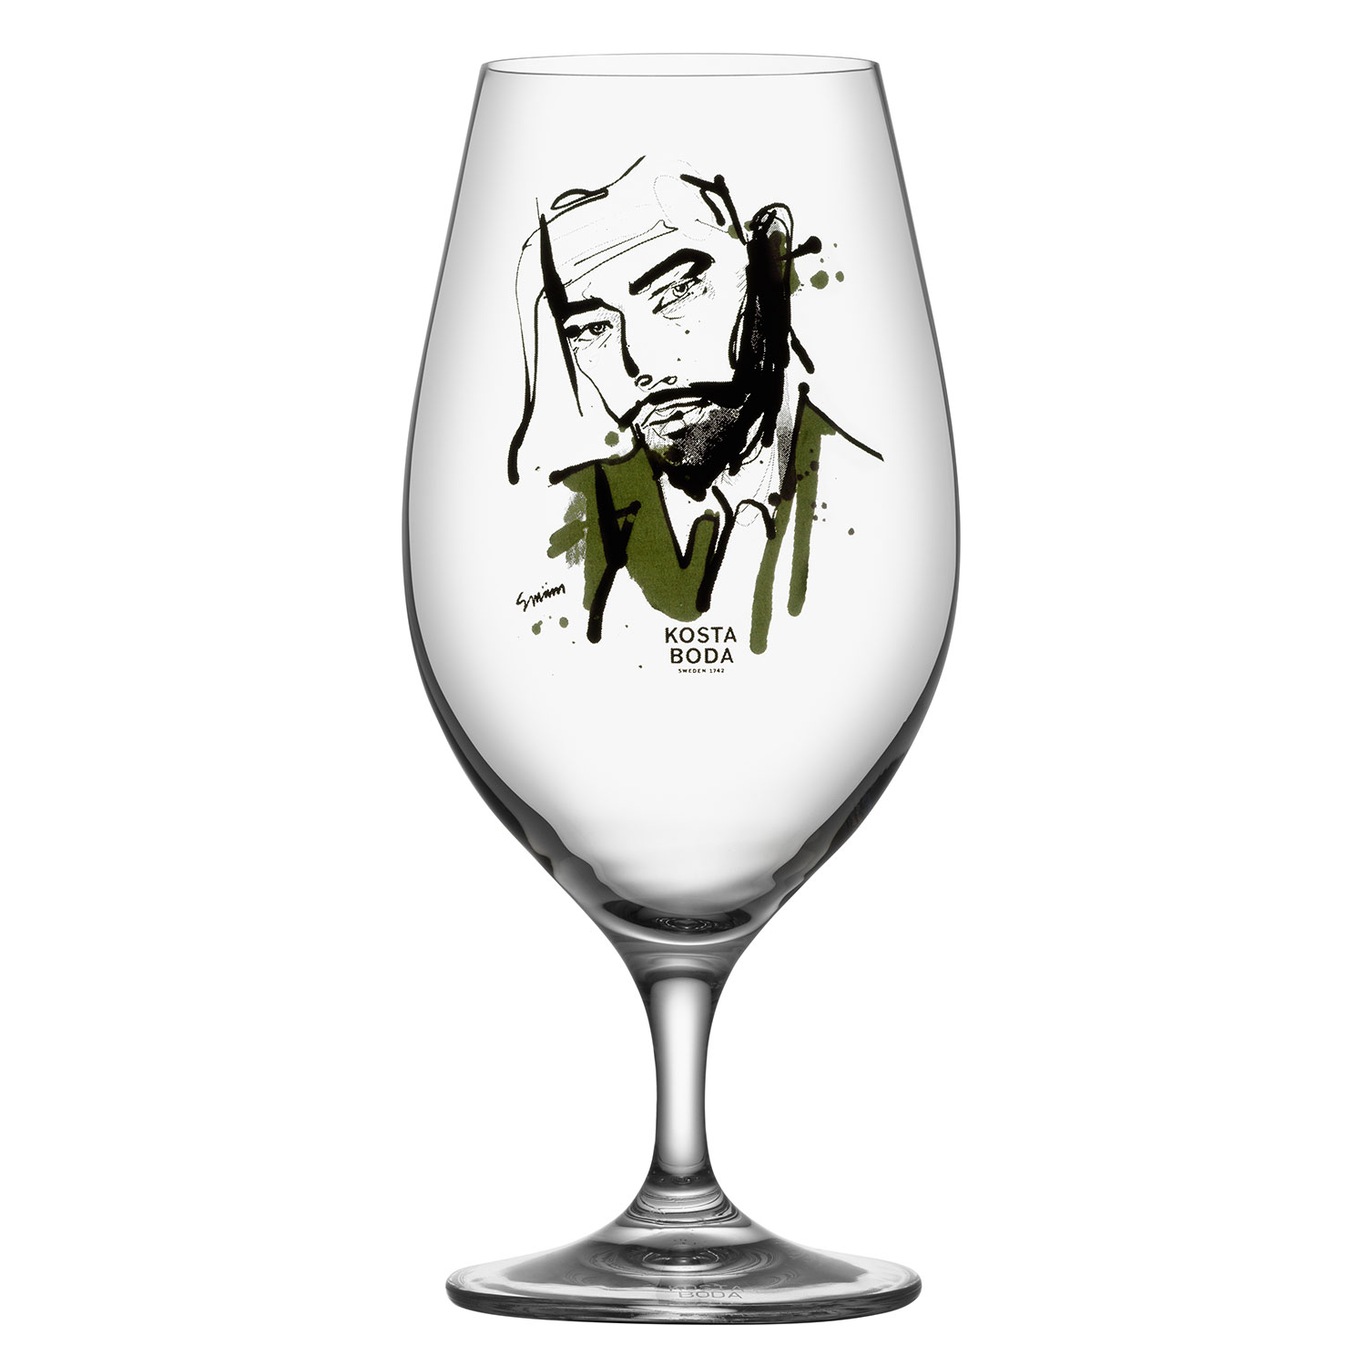 All About You Beer Glass Set of 2, Want Him